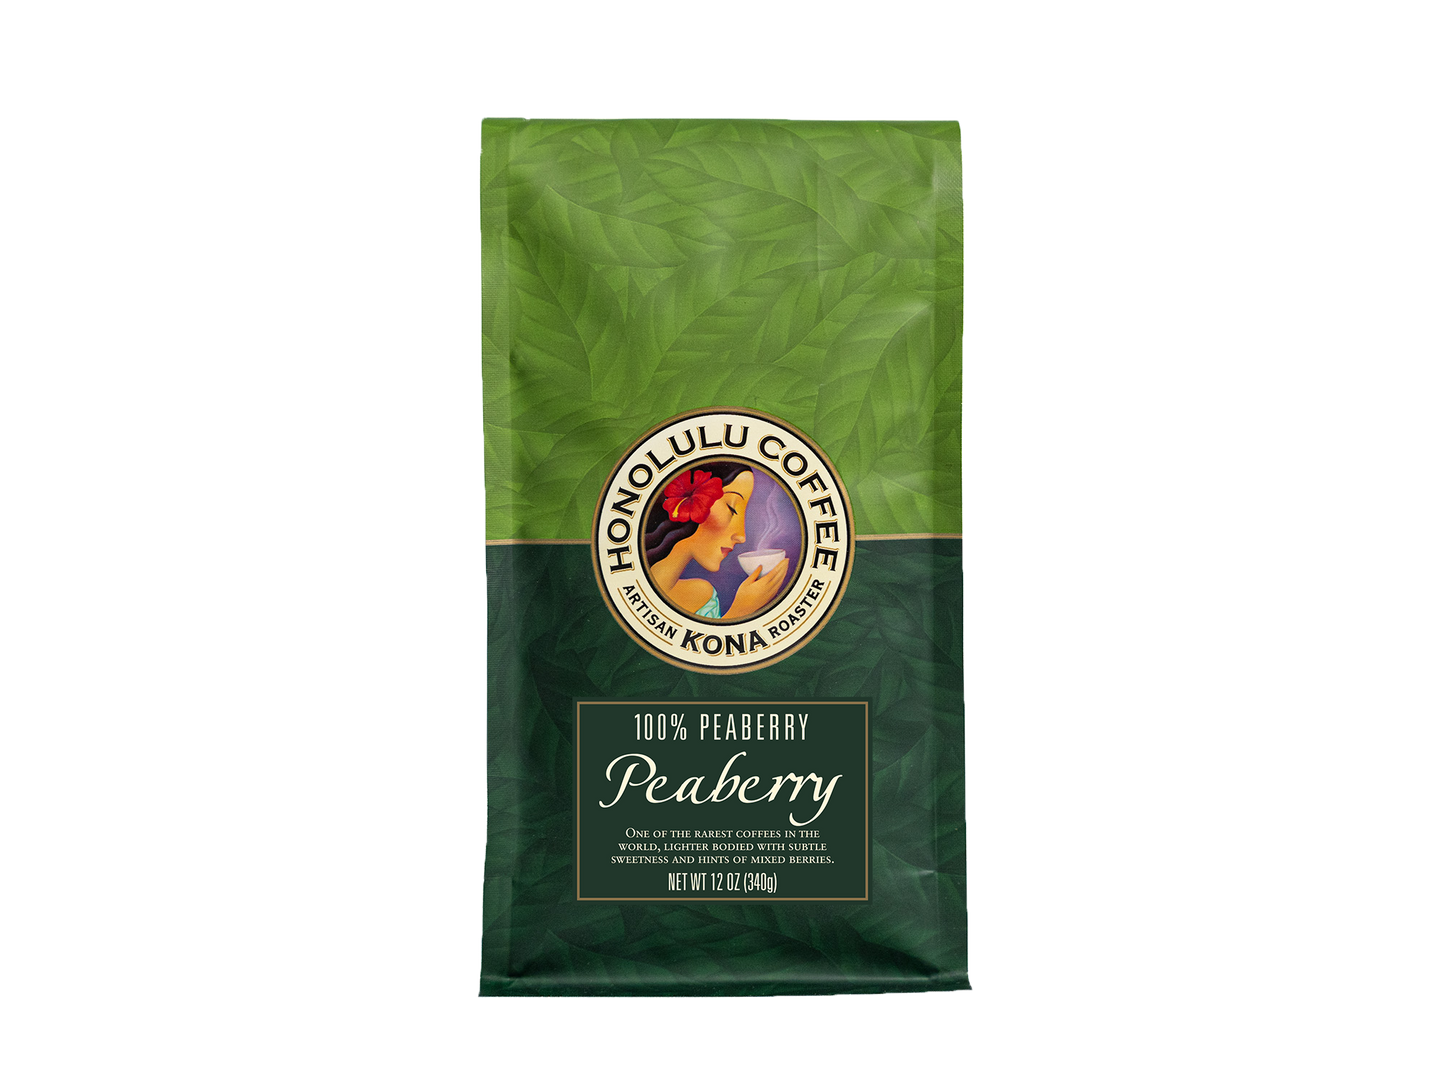 COFFEE-LOVER REVIEWS HONEY PROCESS COFFEE - ONE WORLD ROASTERS